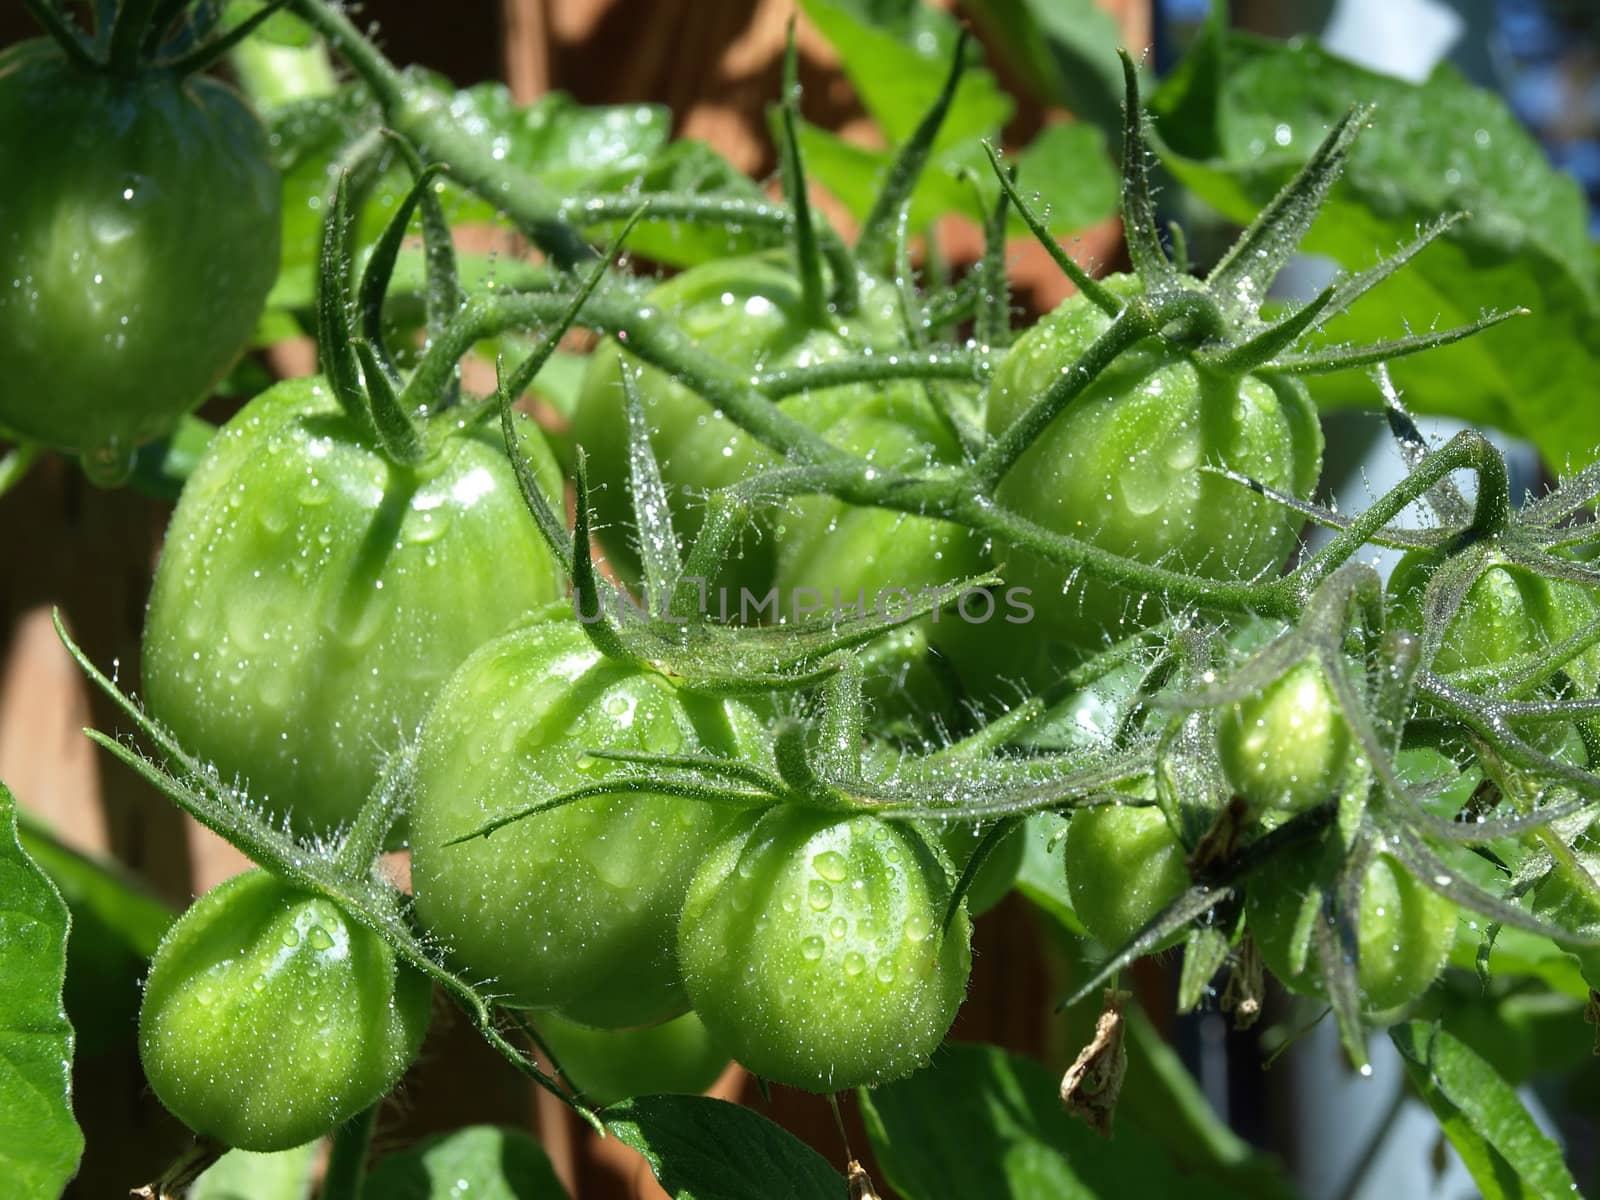 A group of green tomatoes growing in a bunch on a vine in a garden